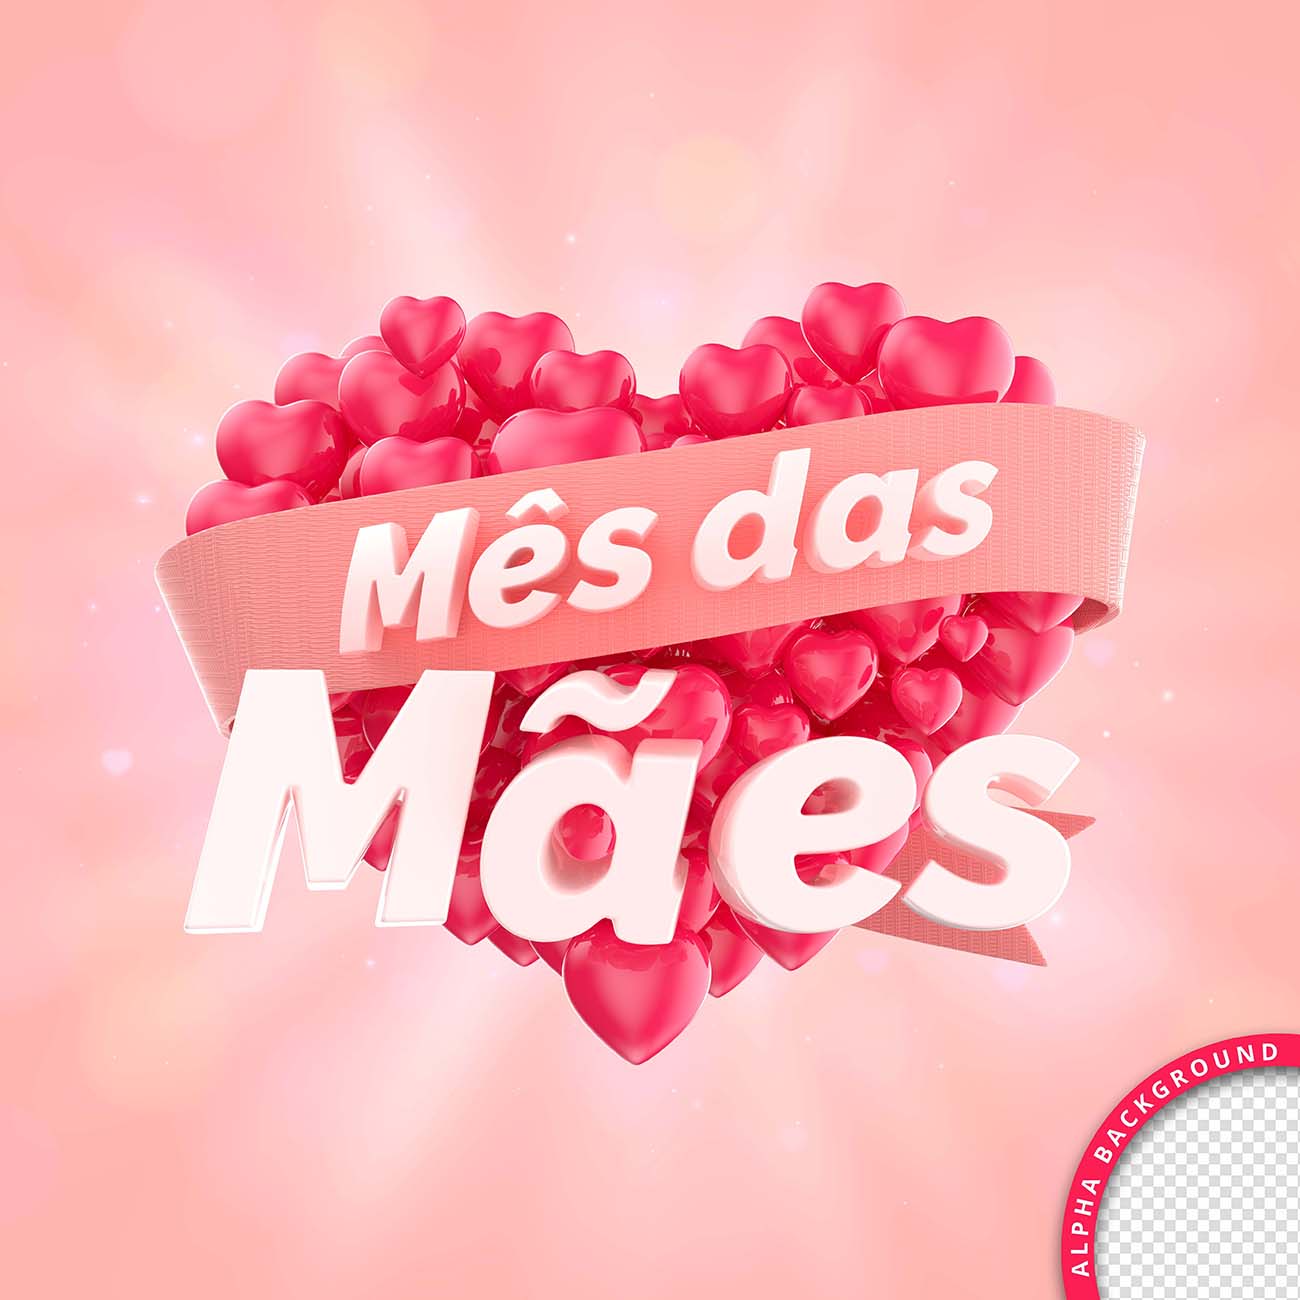 Mes das maes，母亲的月贺卡，措辞与心。3d渲染Psd源文件mes-das-maes-mother-s-month-greeting-card-with-wor